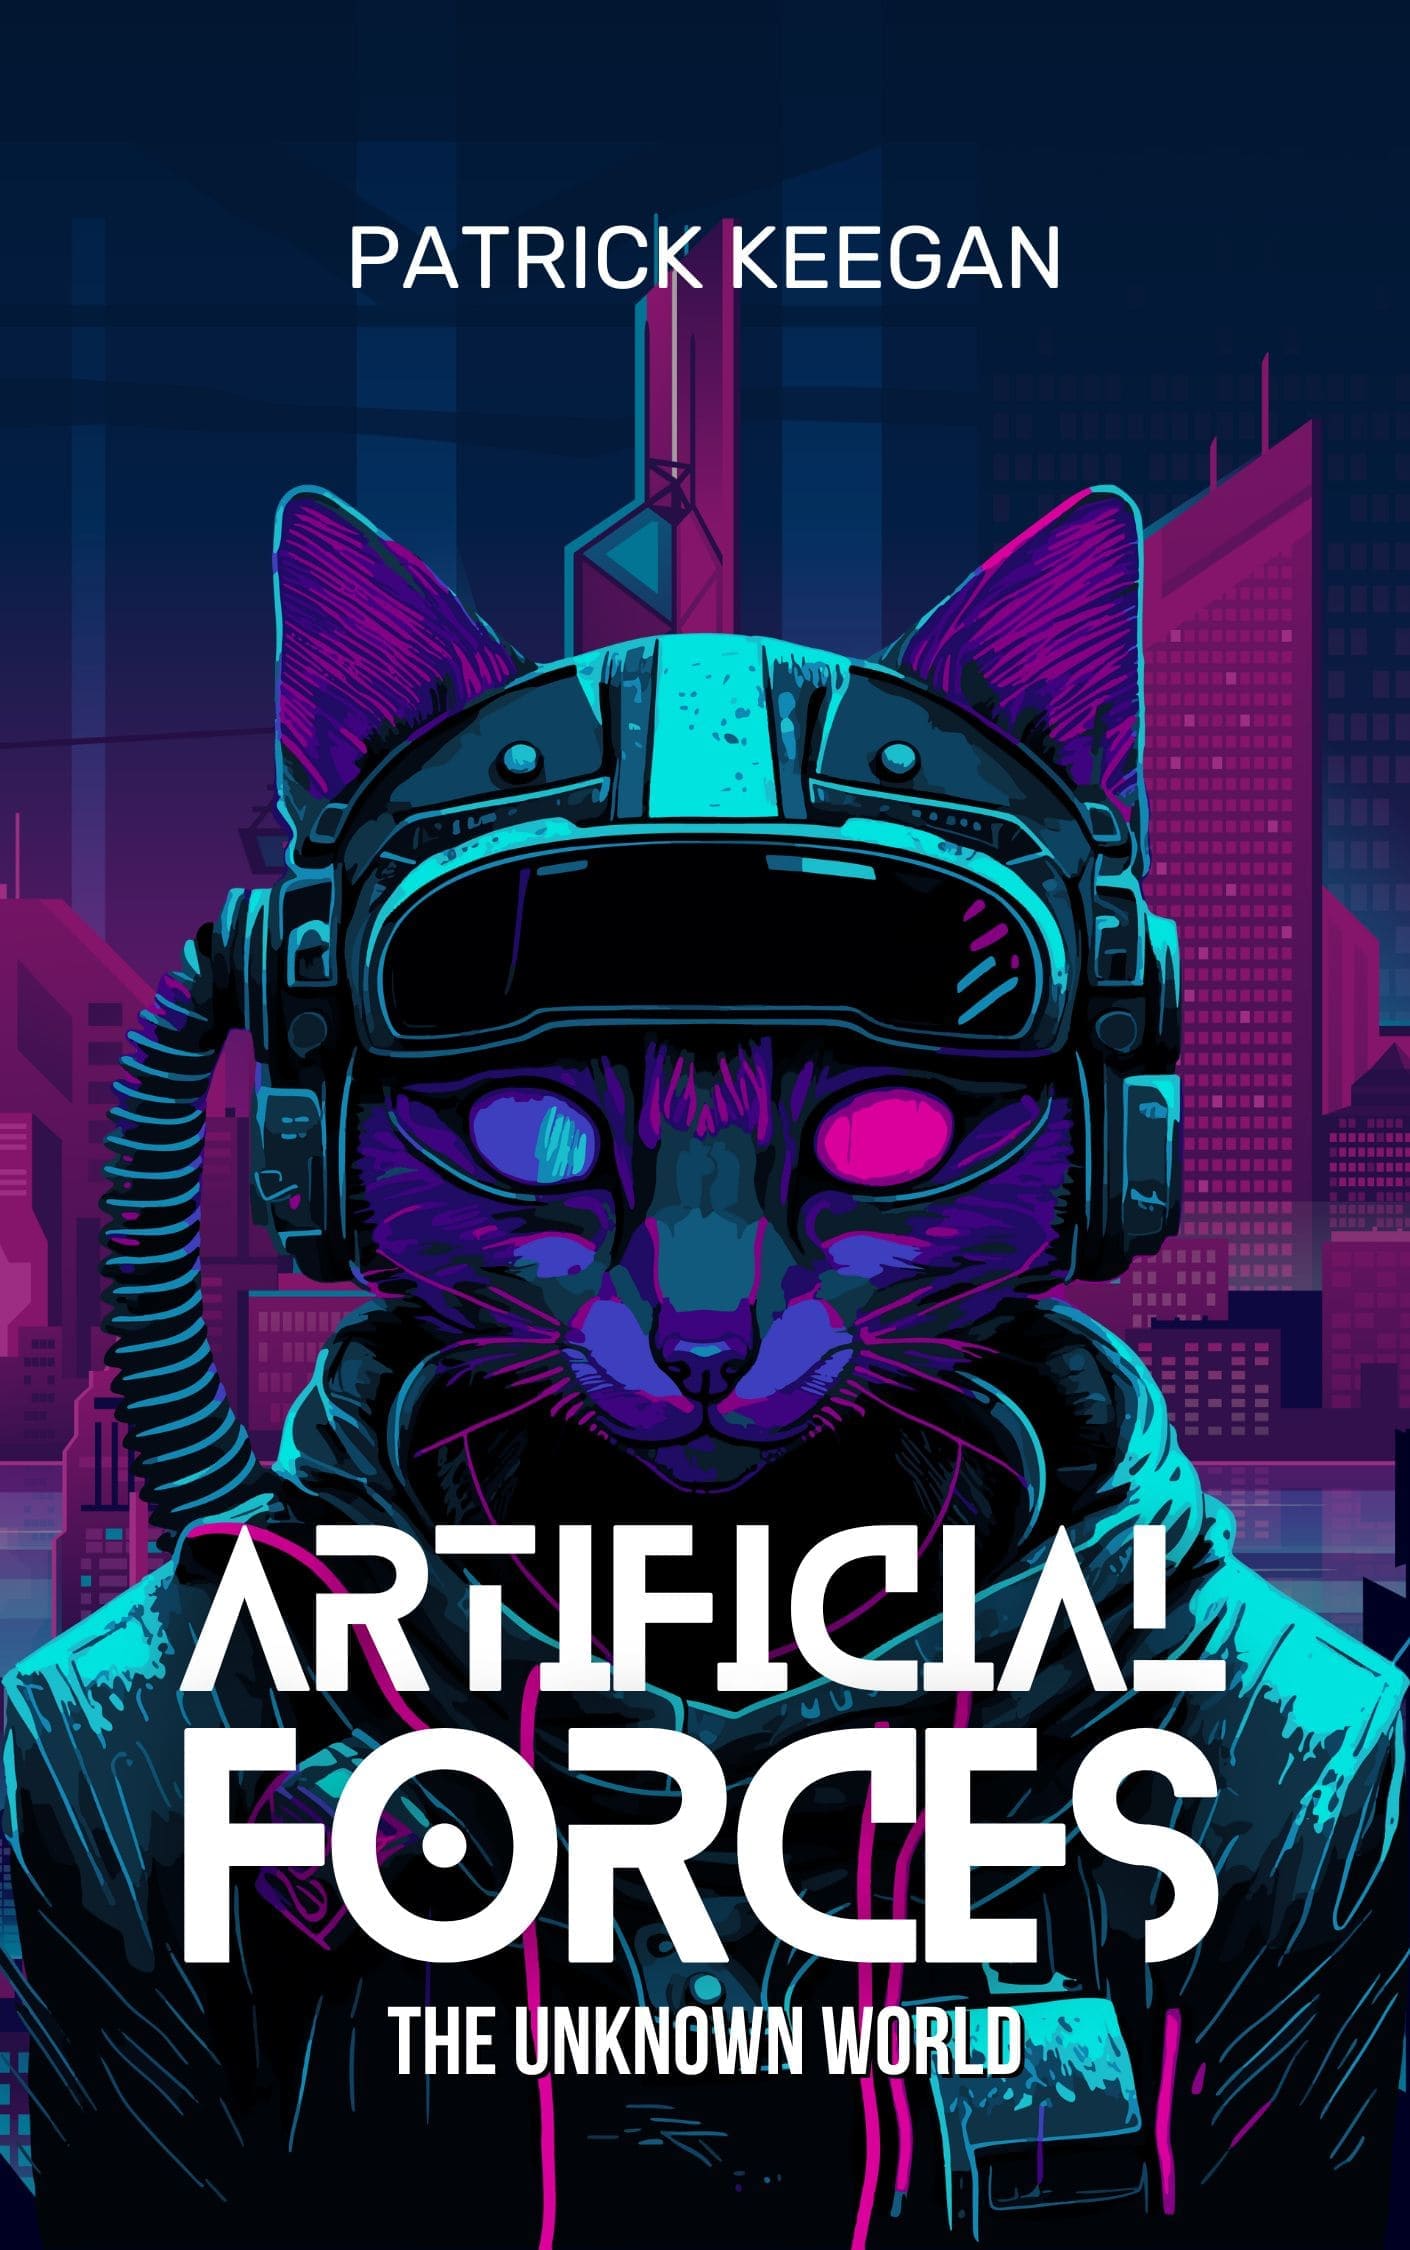 Artificial forces exploring the unknown world.